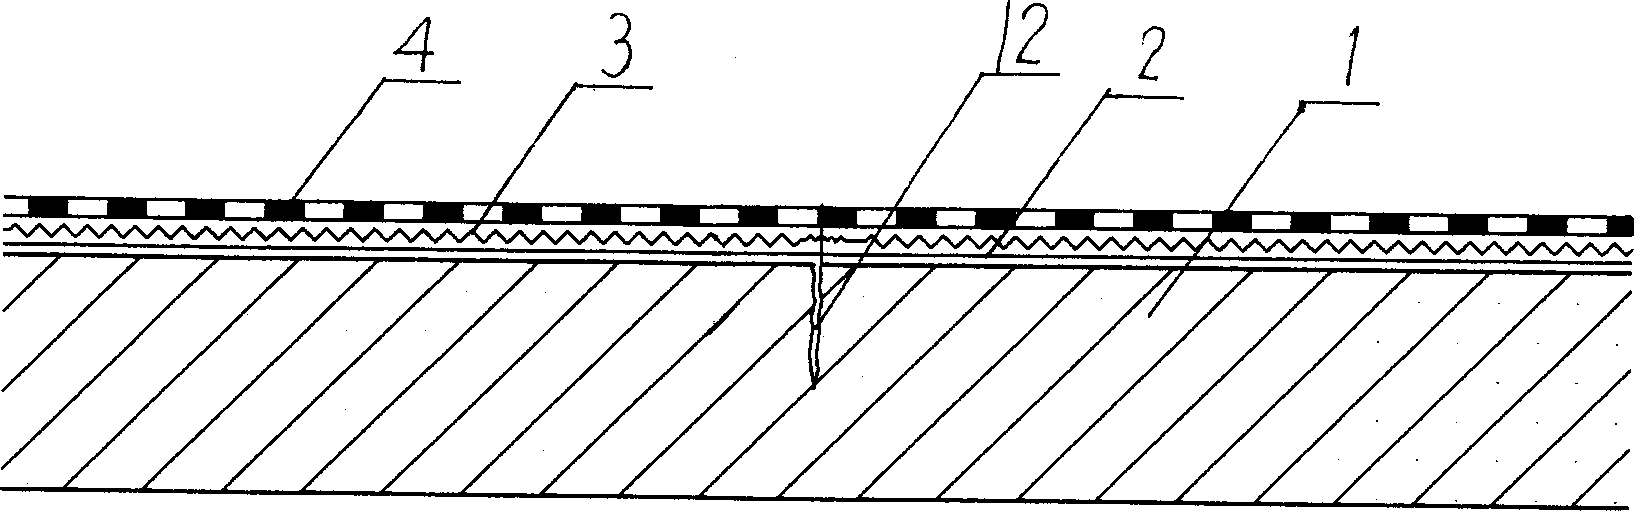 Laminated composite water-proof structure with double side self adhesive water-proof coil as base layer and its construction method